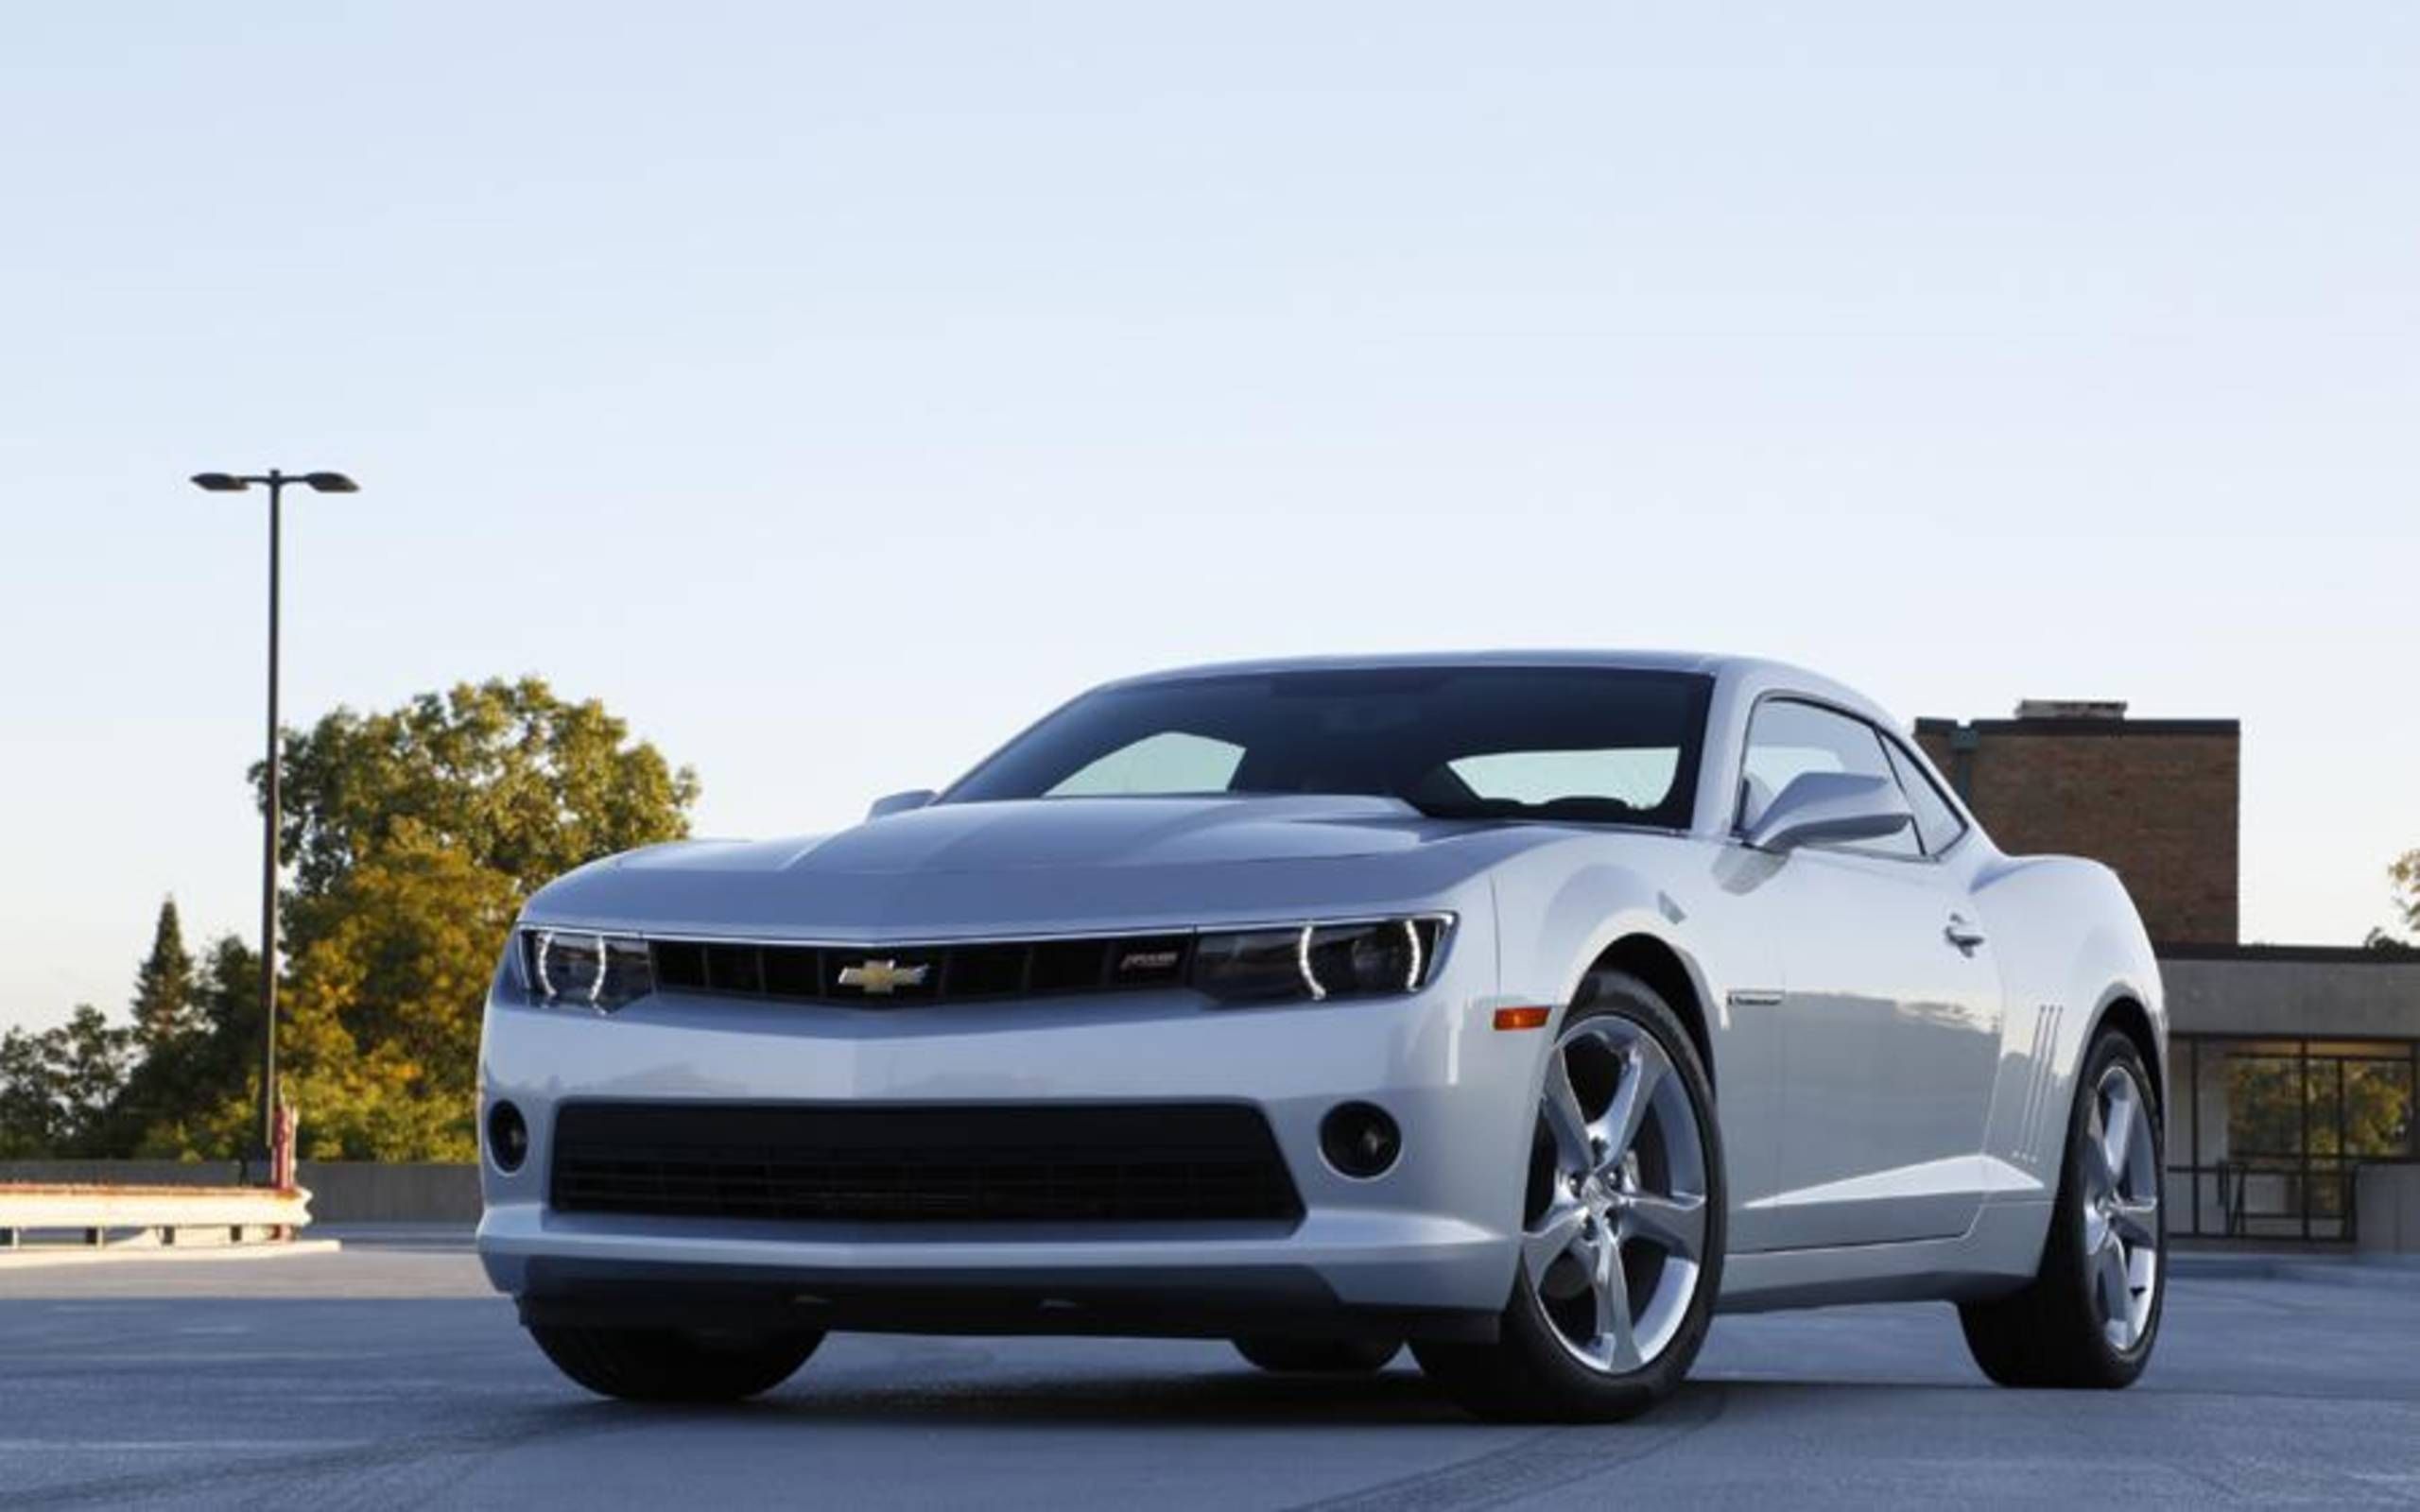 Chevrolet recalls every Camaro built since 2010 for ignition switch defect